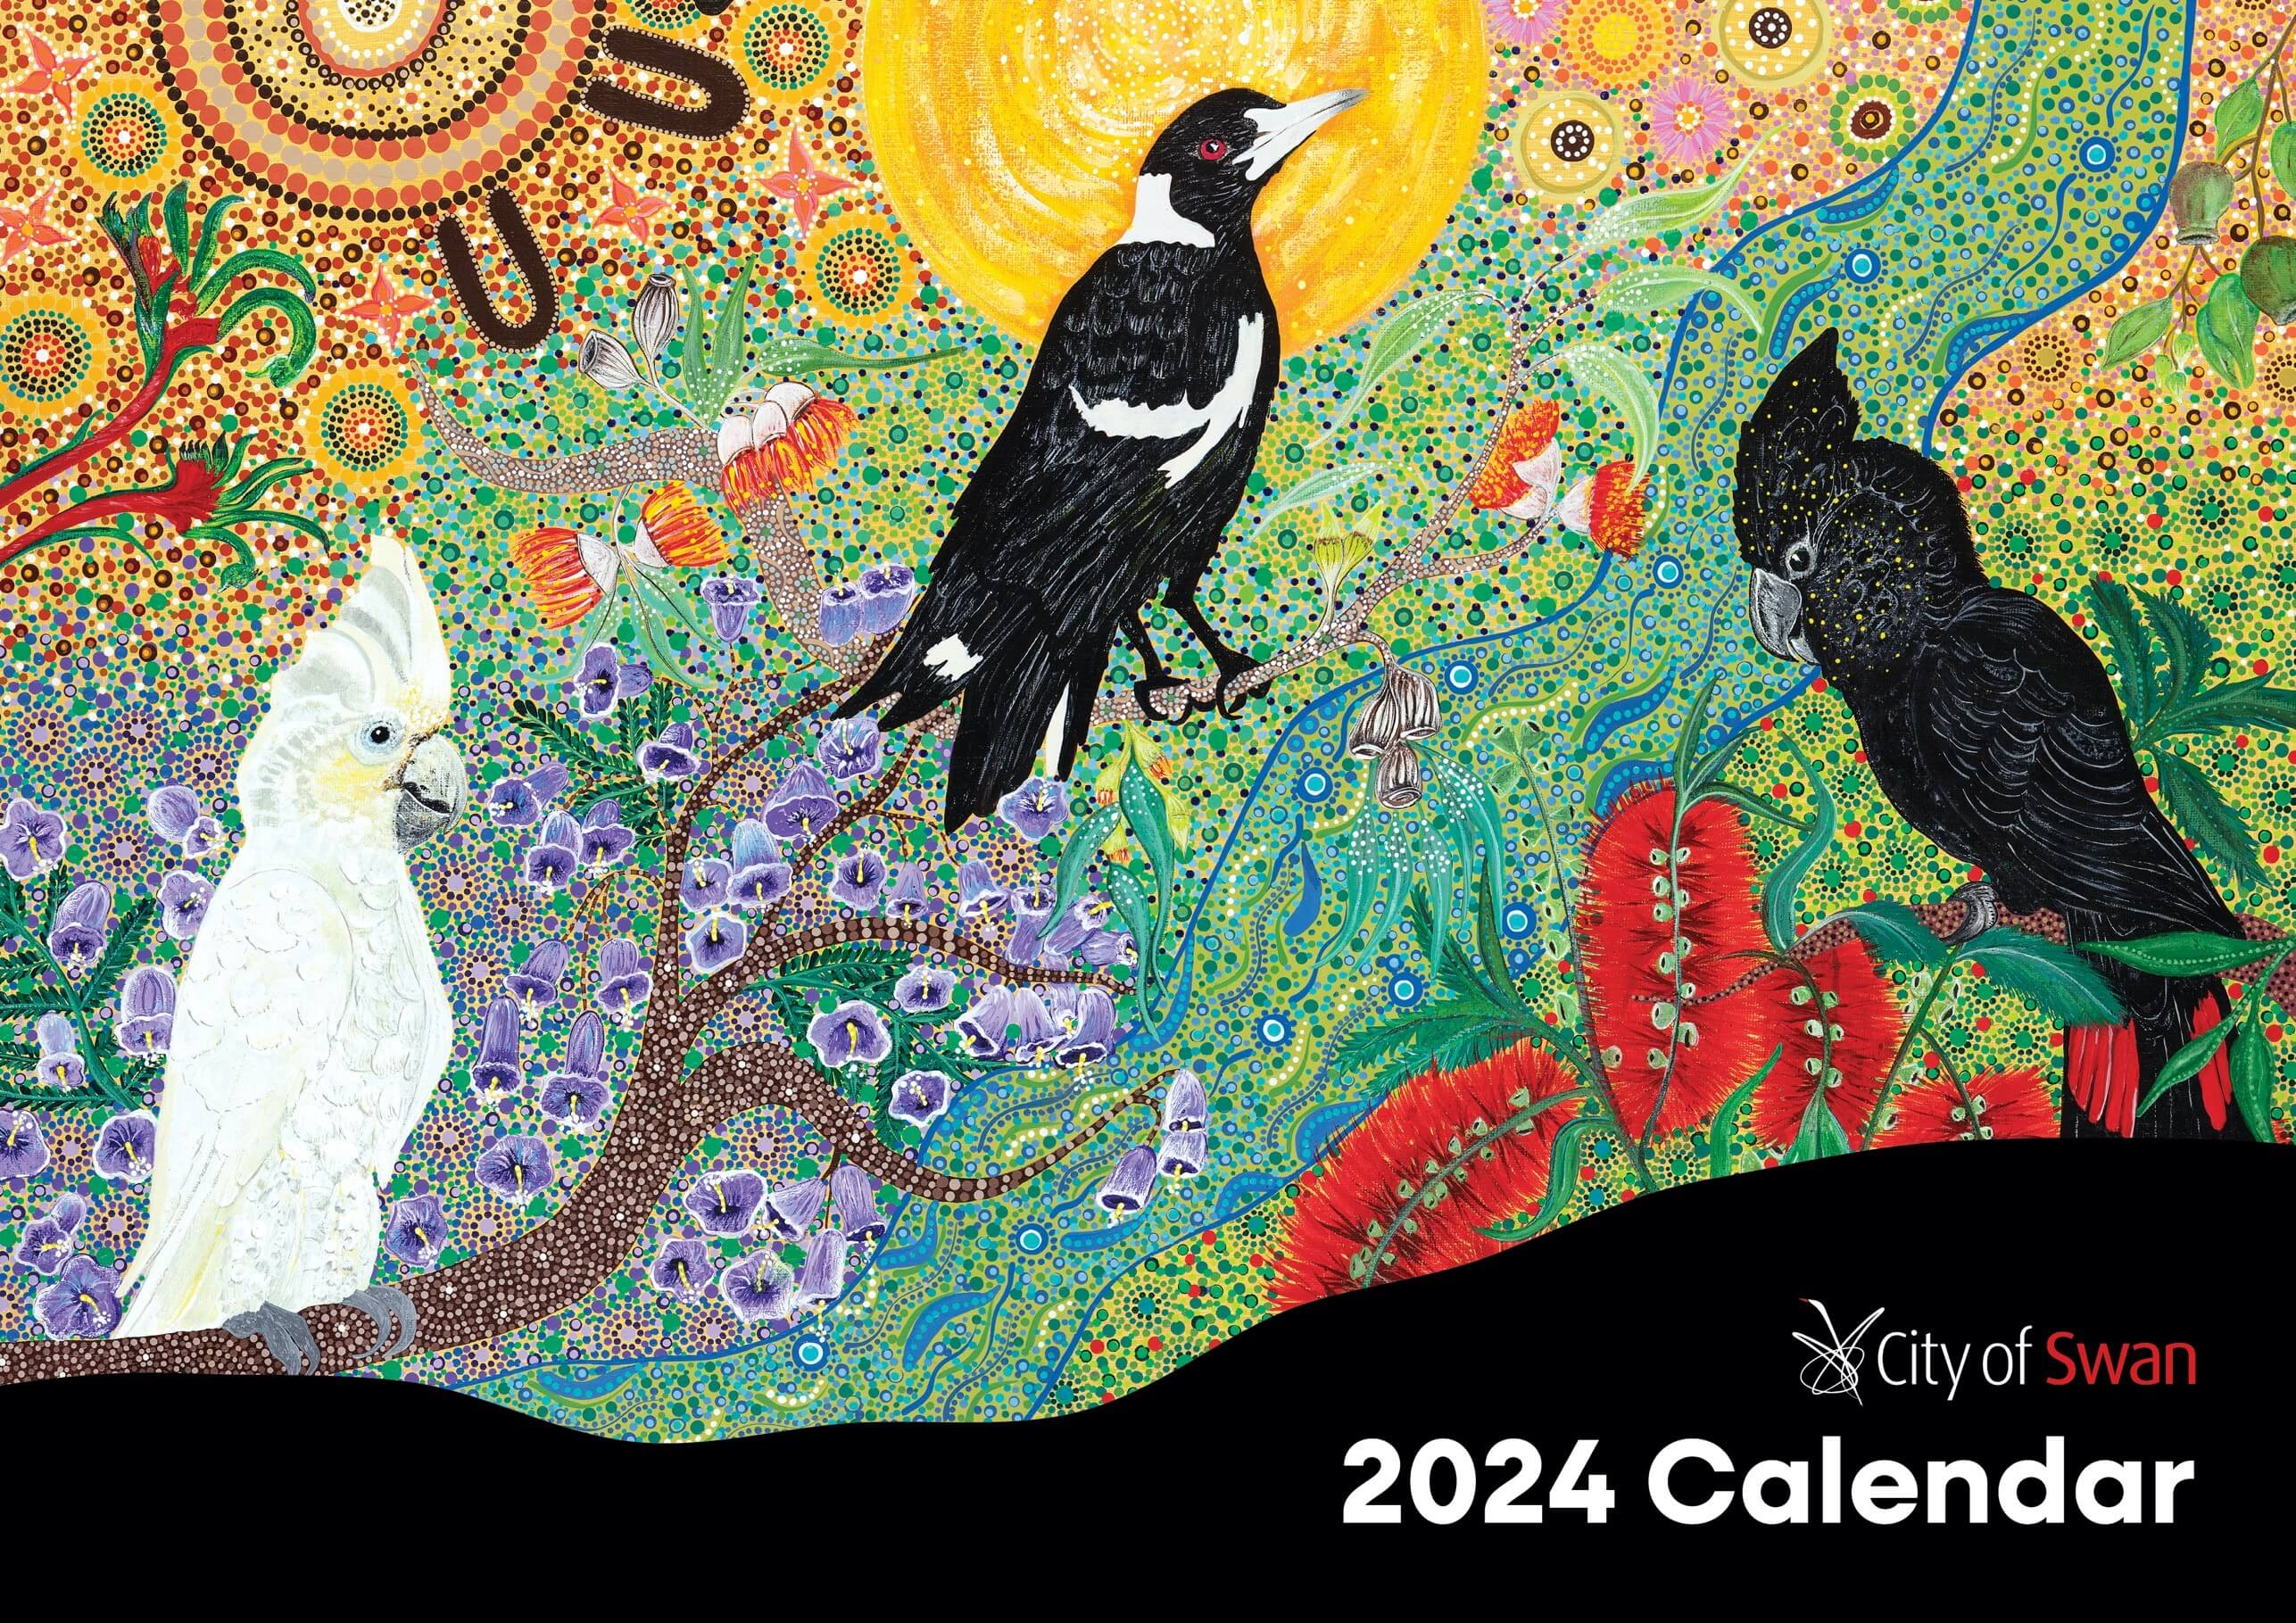 The City of Swan’s 2024 Community Calendar, with cover artwork by Julie Winmar.